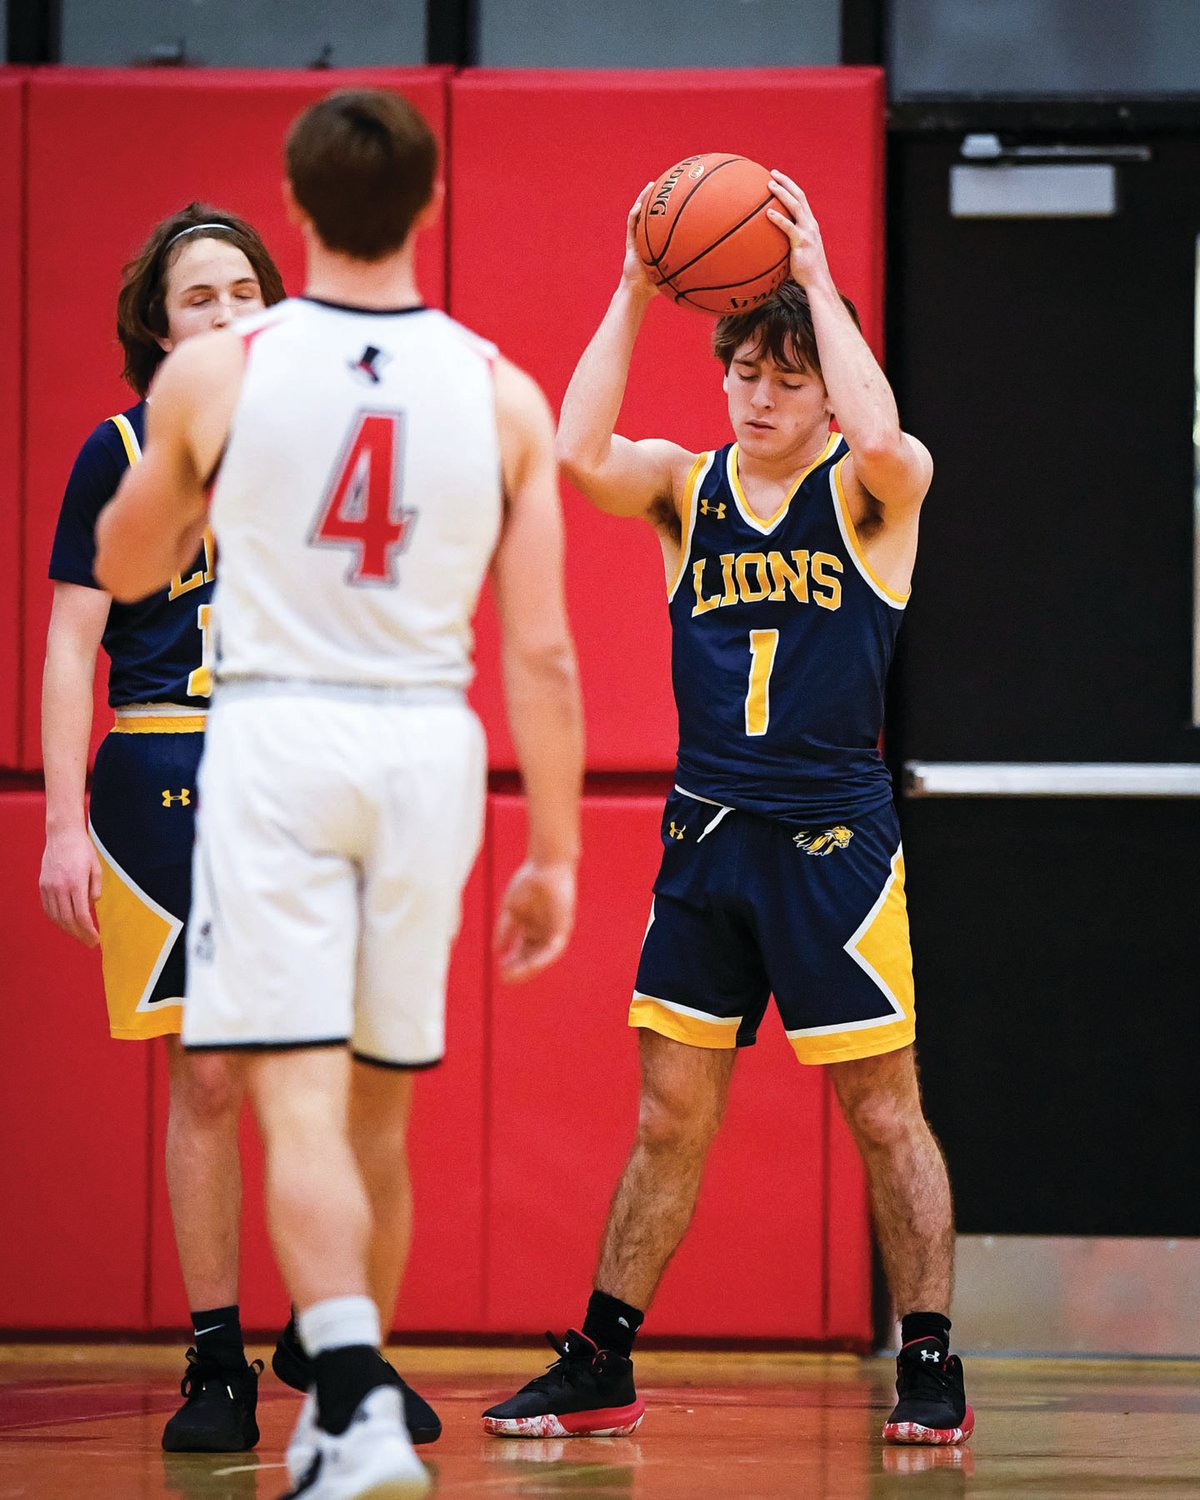 New Hope-Solebury’s Jon Wilson reacts to a foul after a rebound.